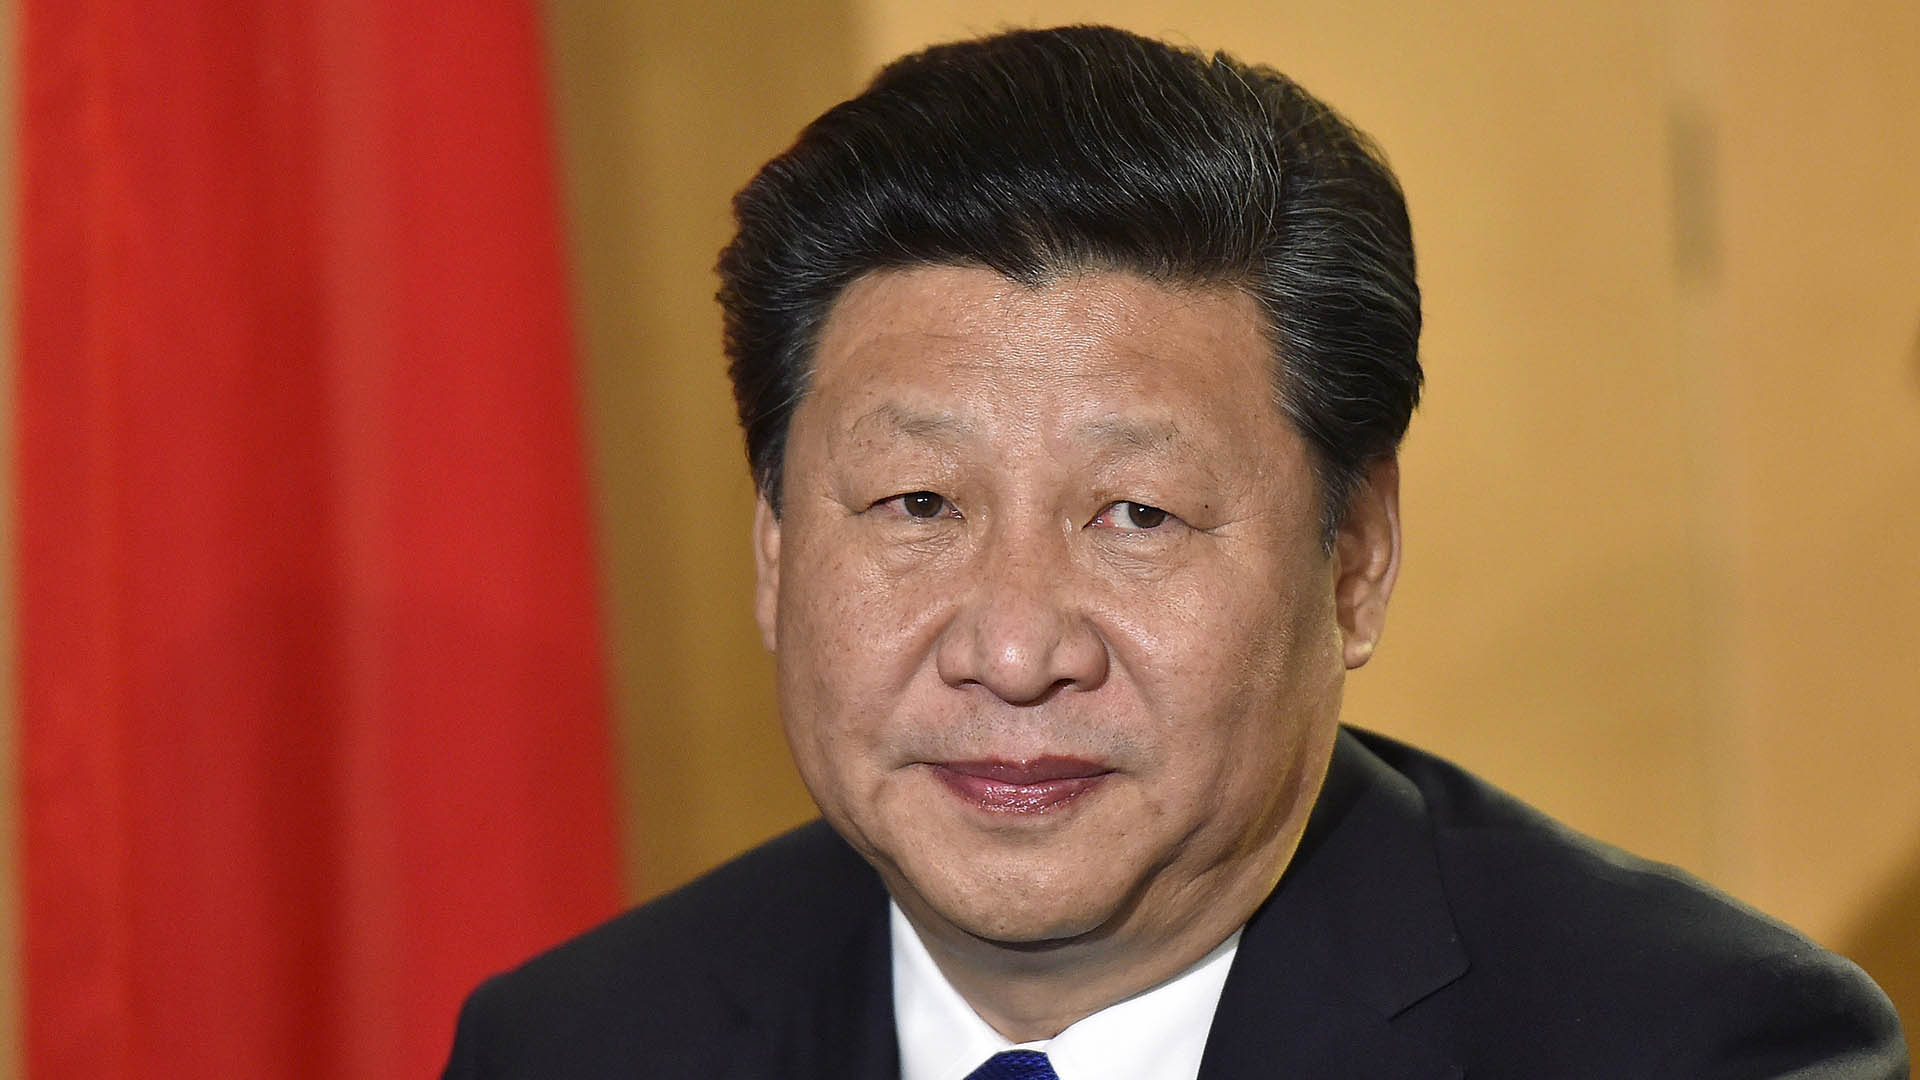 Xi Jinping, presidente de China.  (Photo by Toby Melville - WPA Pool/Getty Images)